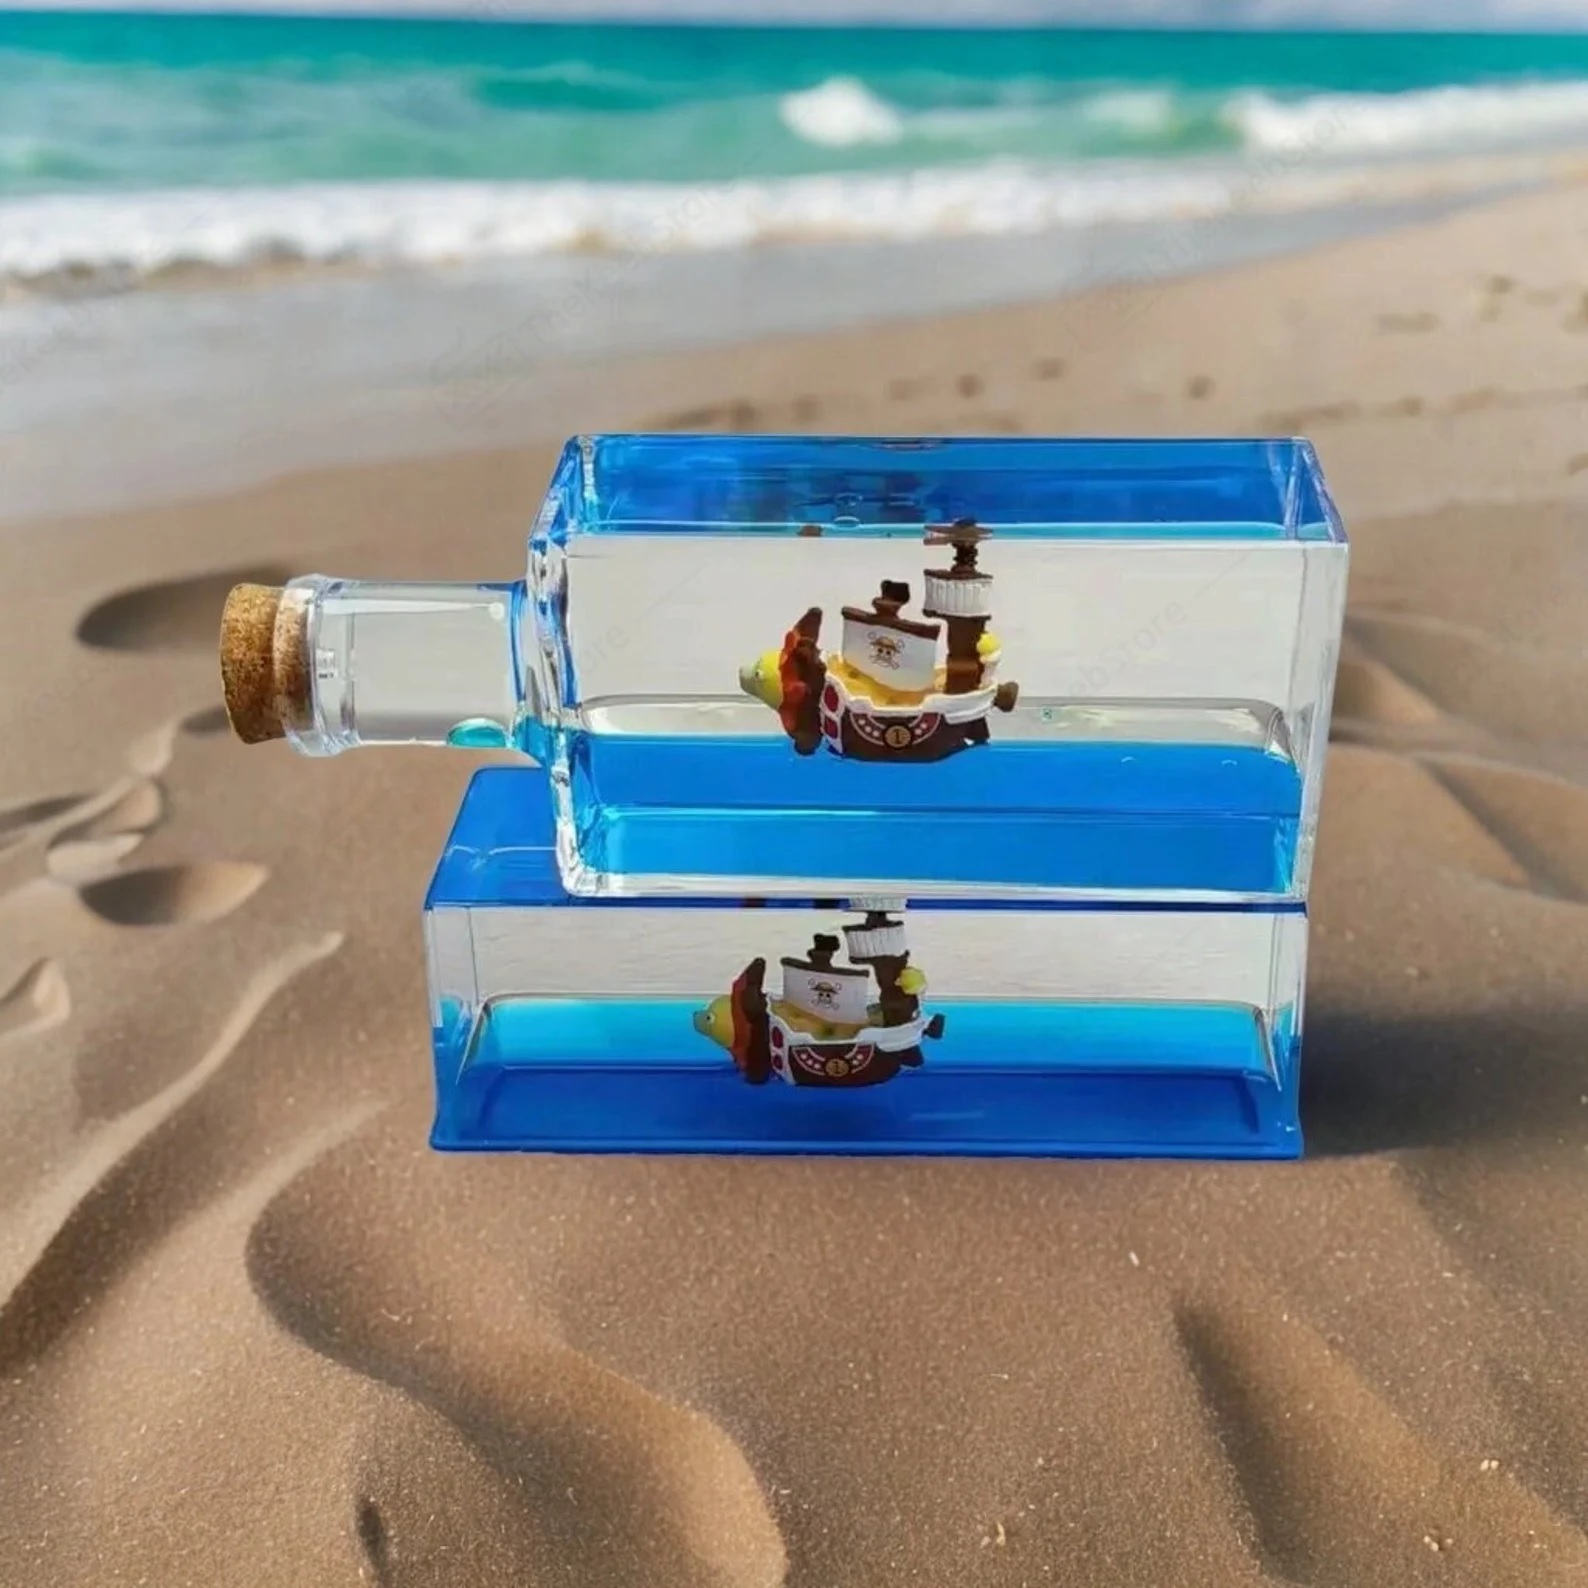 Two ships in a bottle, stacked one atop the other, each featuring a pirate ship